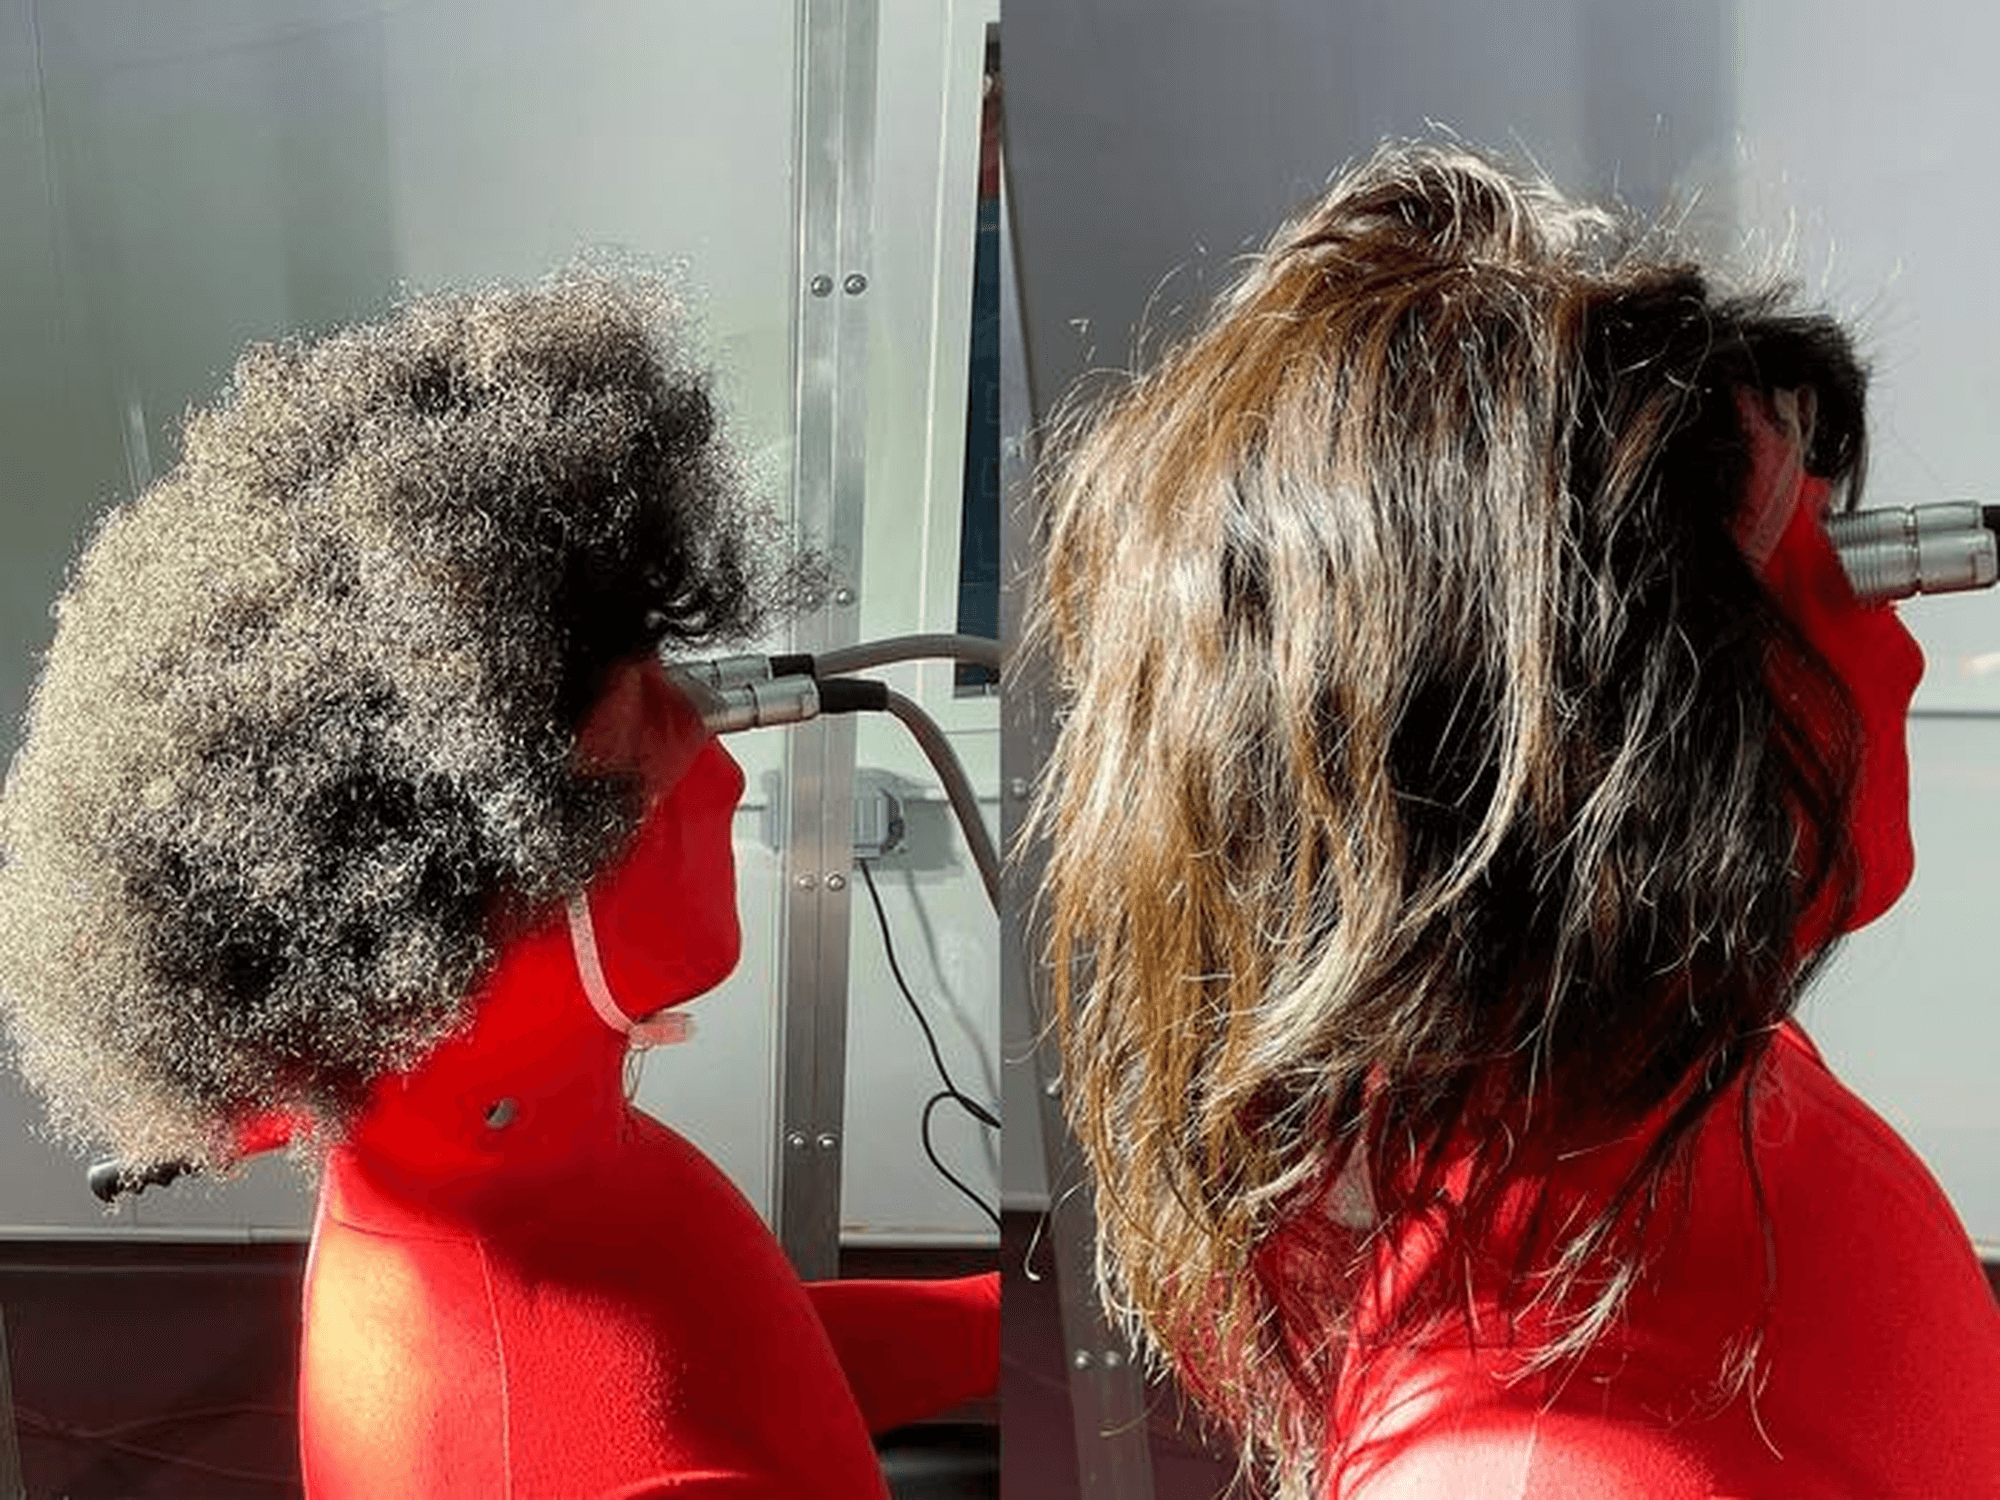 A thermal manikin wearing tightly curled (left) and straight (right) human hair wigs. The manikin uses electric power to simulate body heat and allows scientists to study heat transfer between human skin and the environment. A new study examining the role human hair textures play in regulating body temperature found that tightly curled hair provides the best protection from the sun’s radiative heat while minimizing the need to sweat to stay cool.